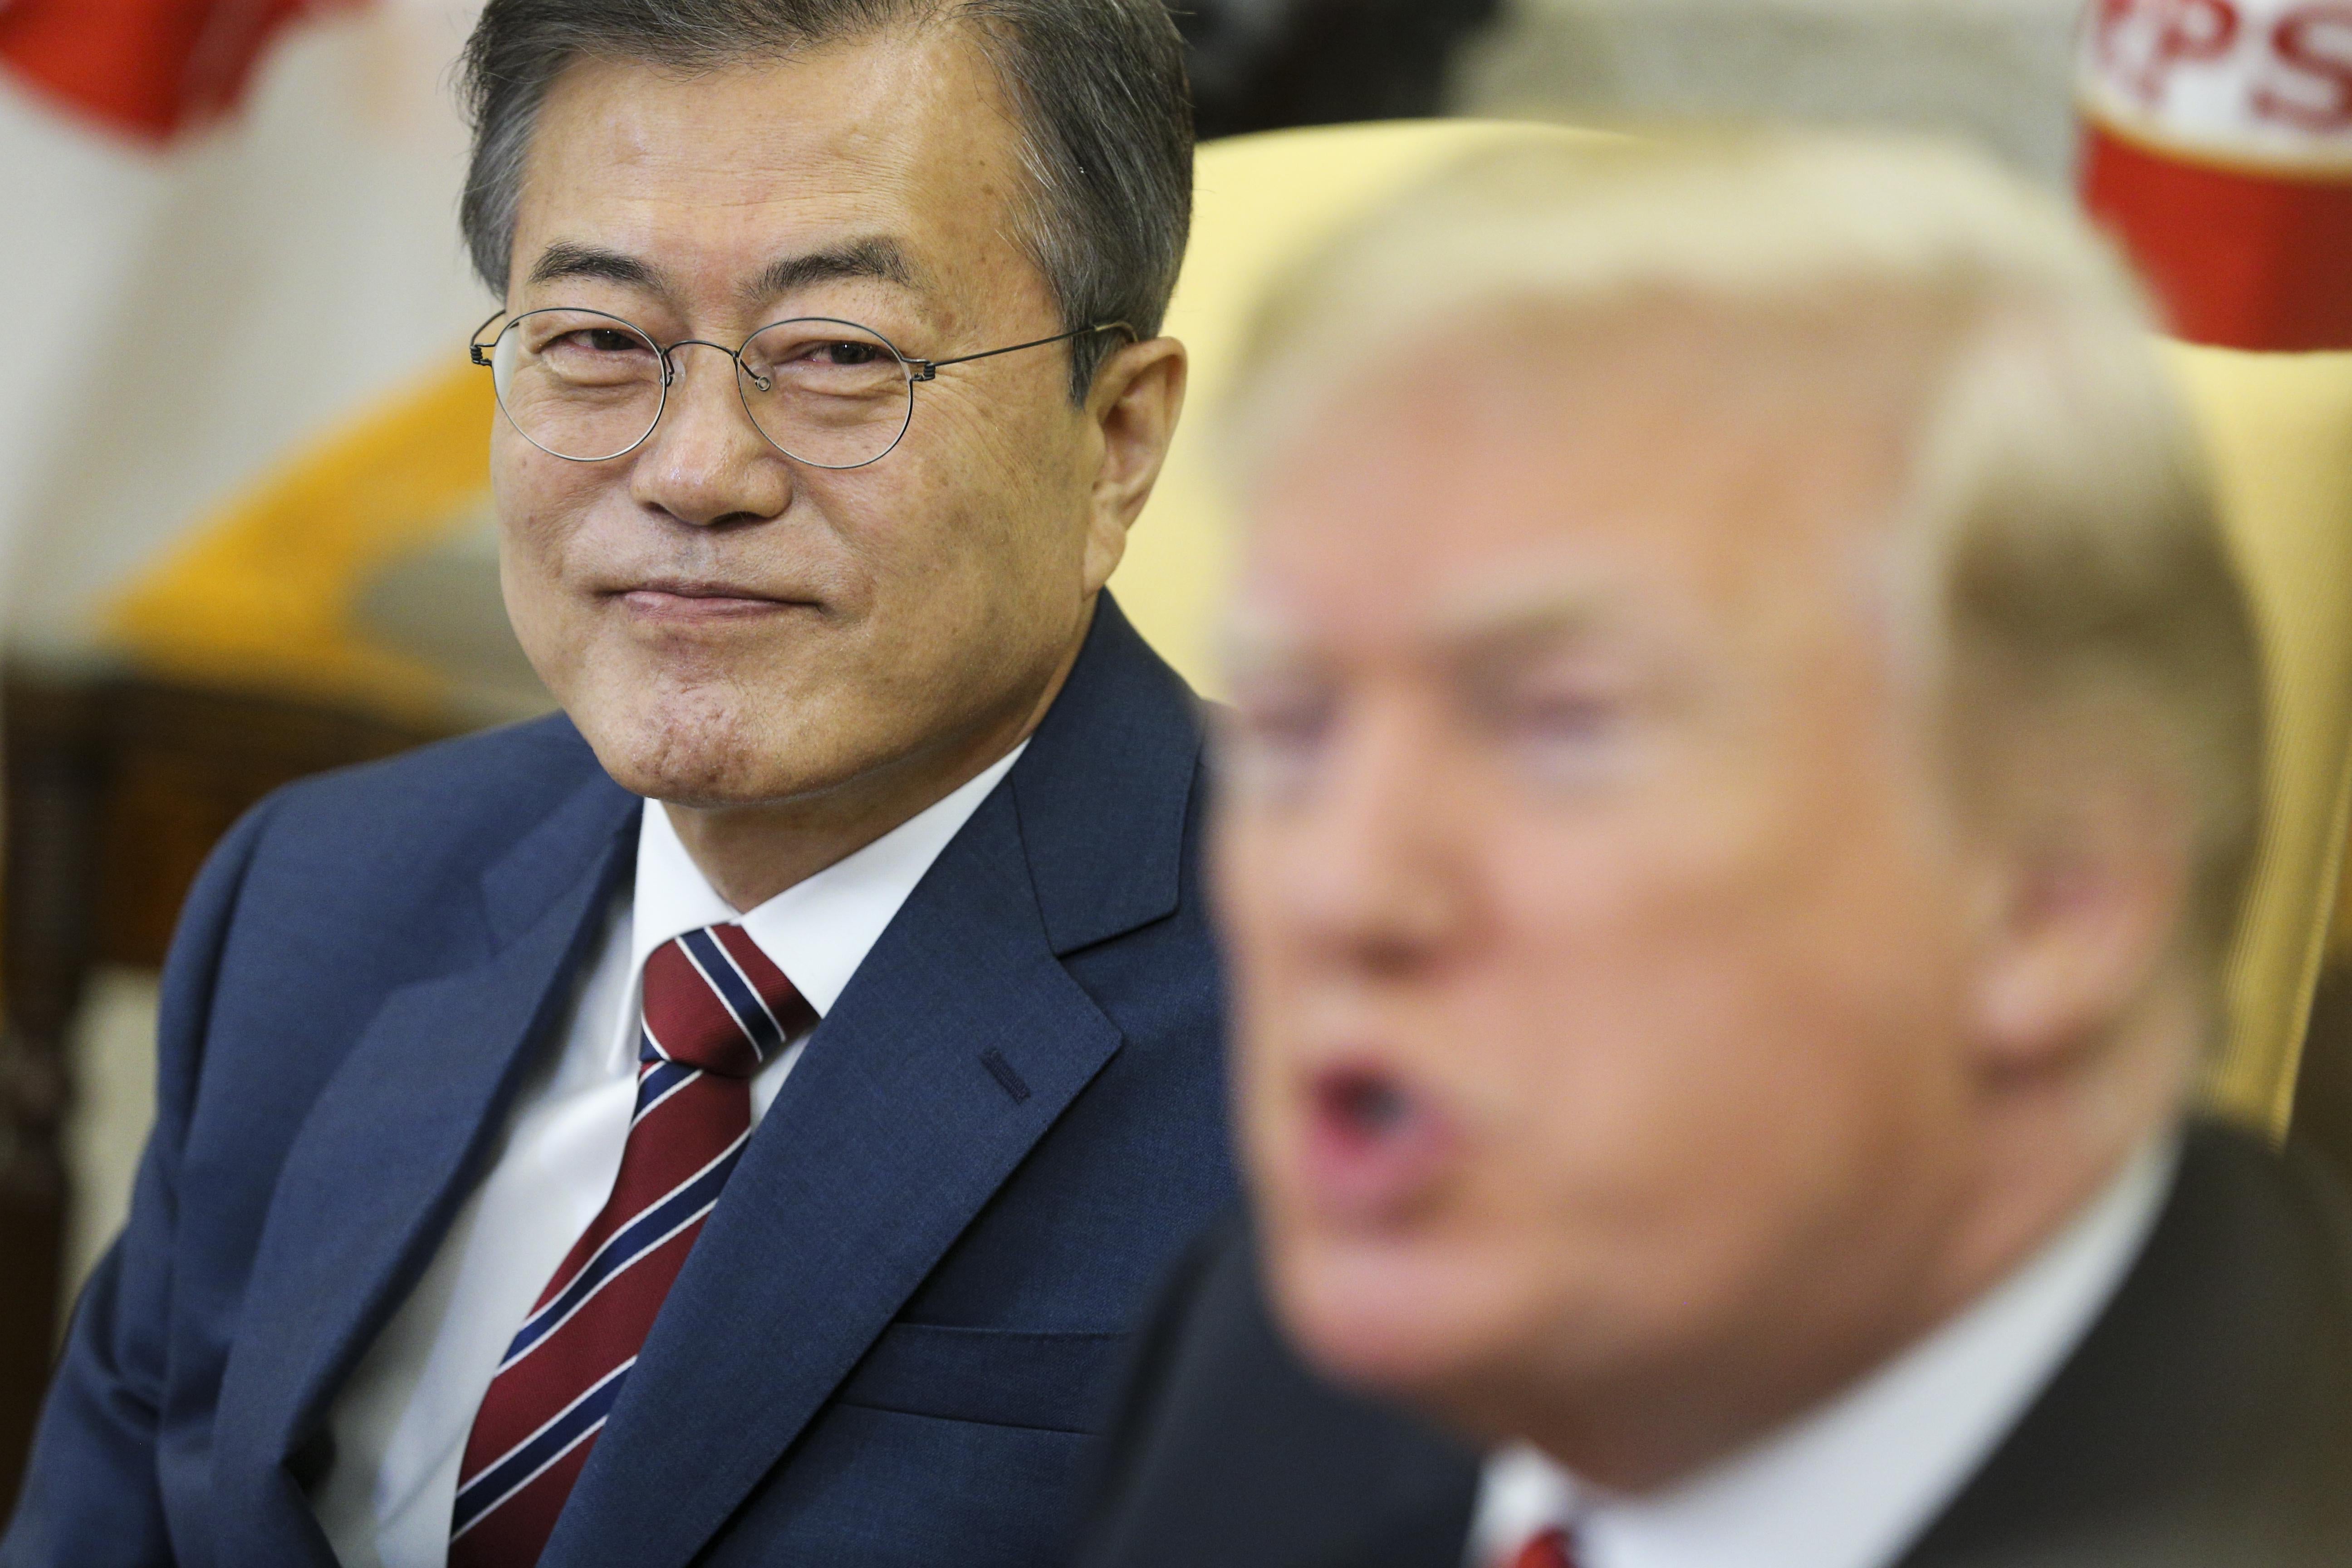 Moon Jae-in straing intently from the side while President Donald Trump speaks.